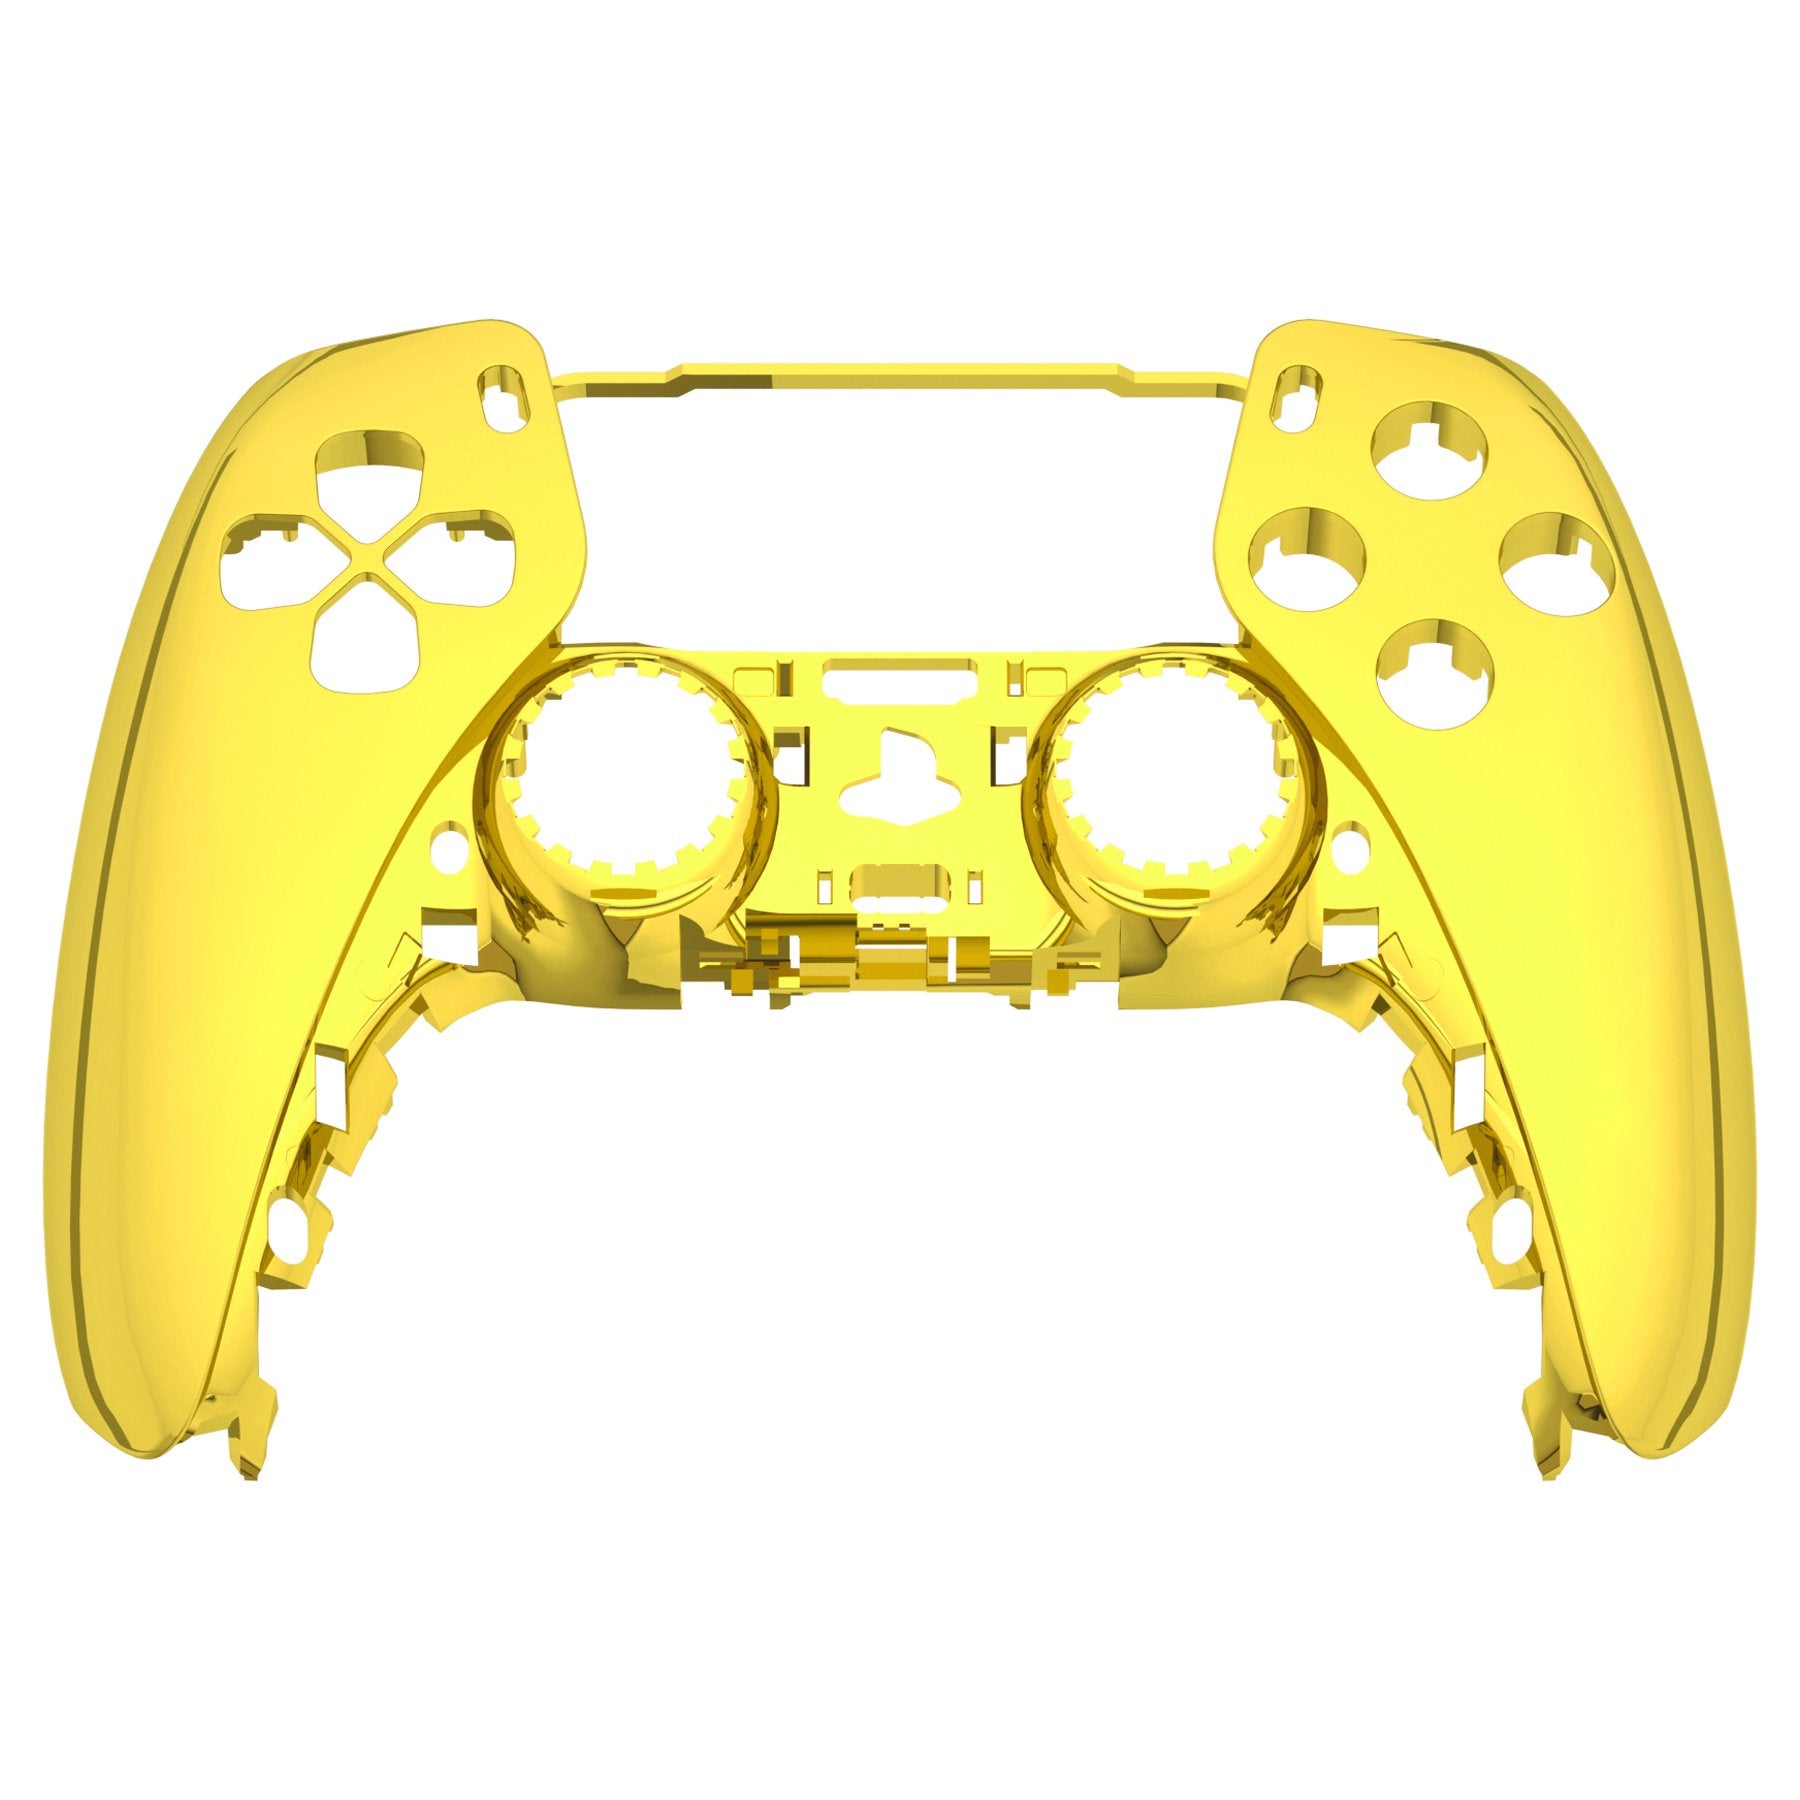 Controller Shell Chrome Golden Glossy Decorative Trim Shell For